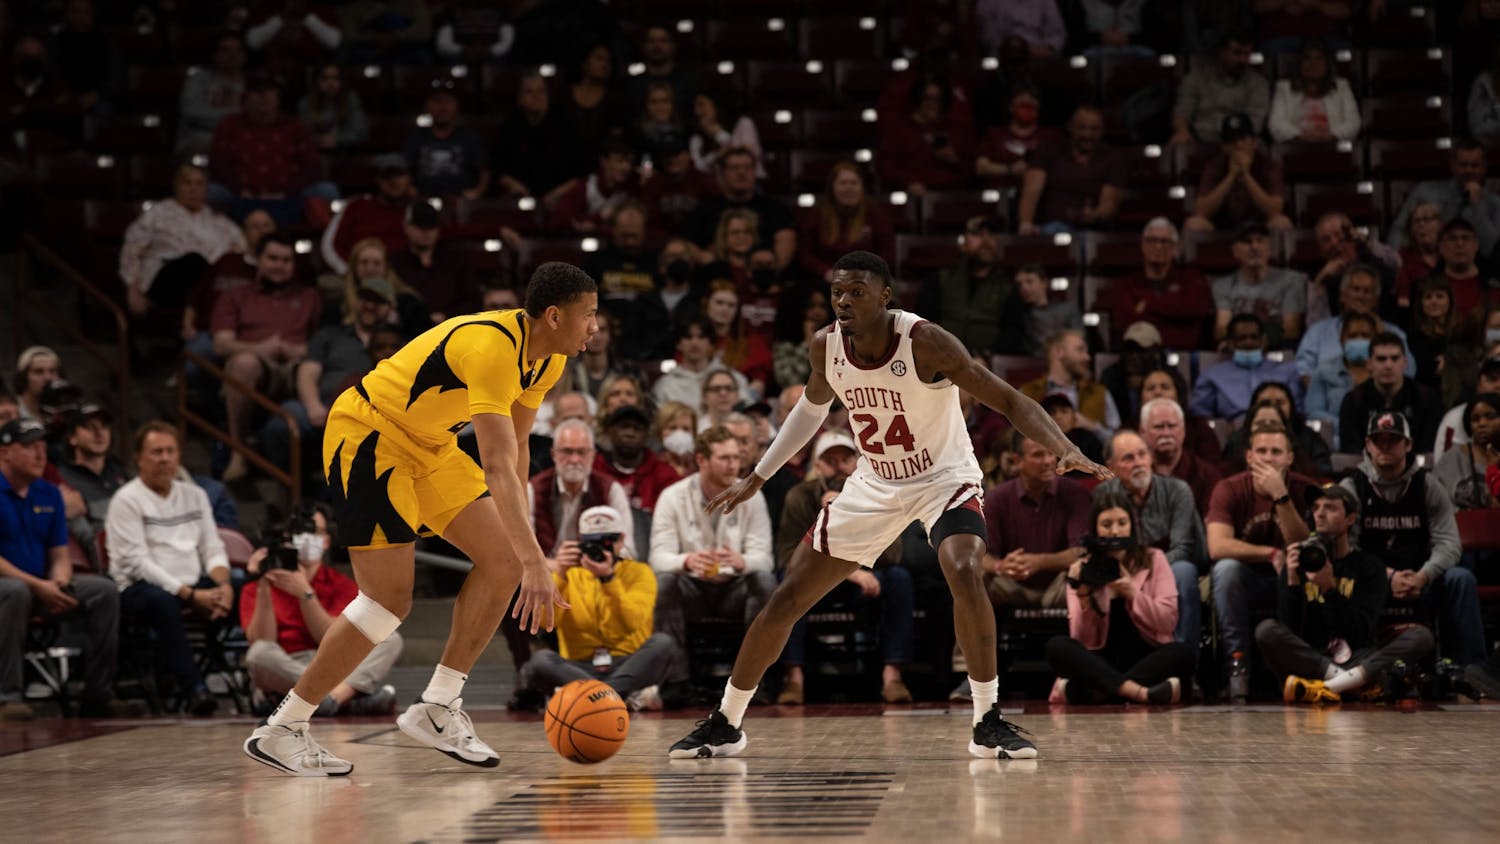 Senior forward Keyshawn Bryant guards Missouri opponent in the men’s basketball game on Tuesday, March 1, 2022. South Carolina defeated Missouri 73-69.